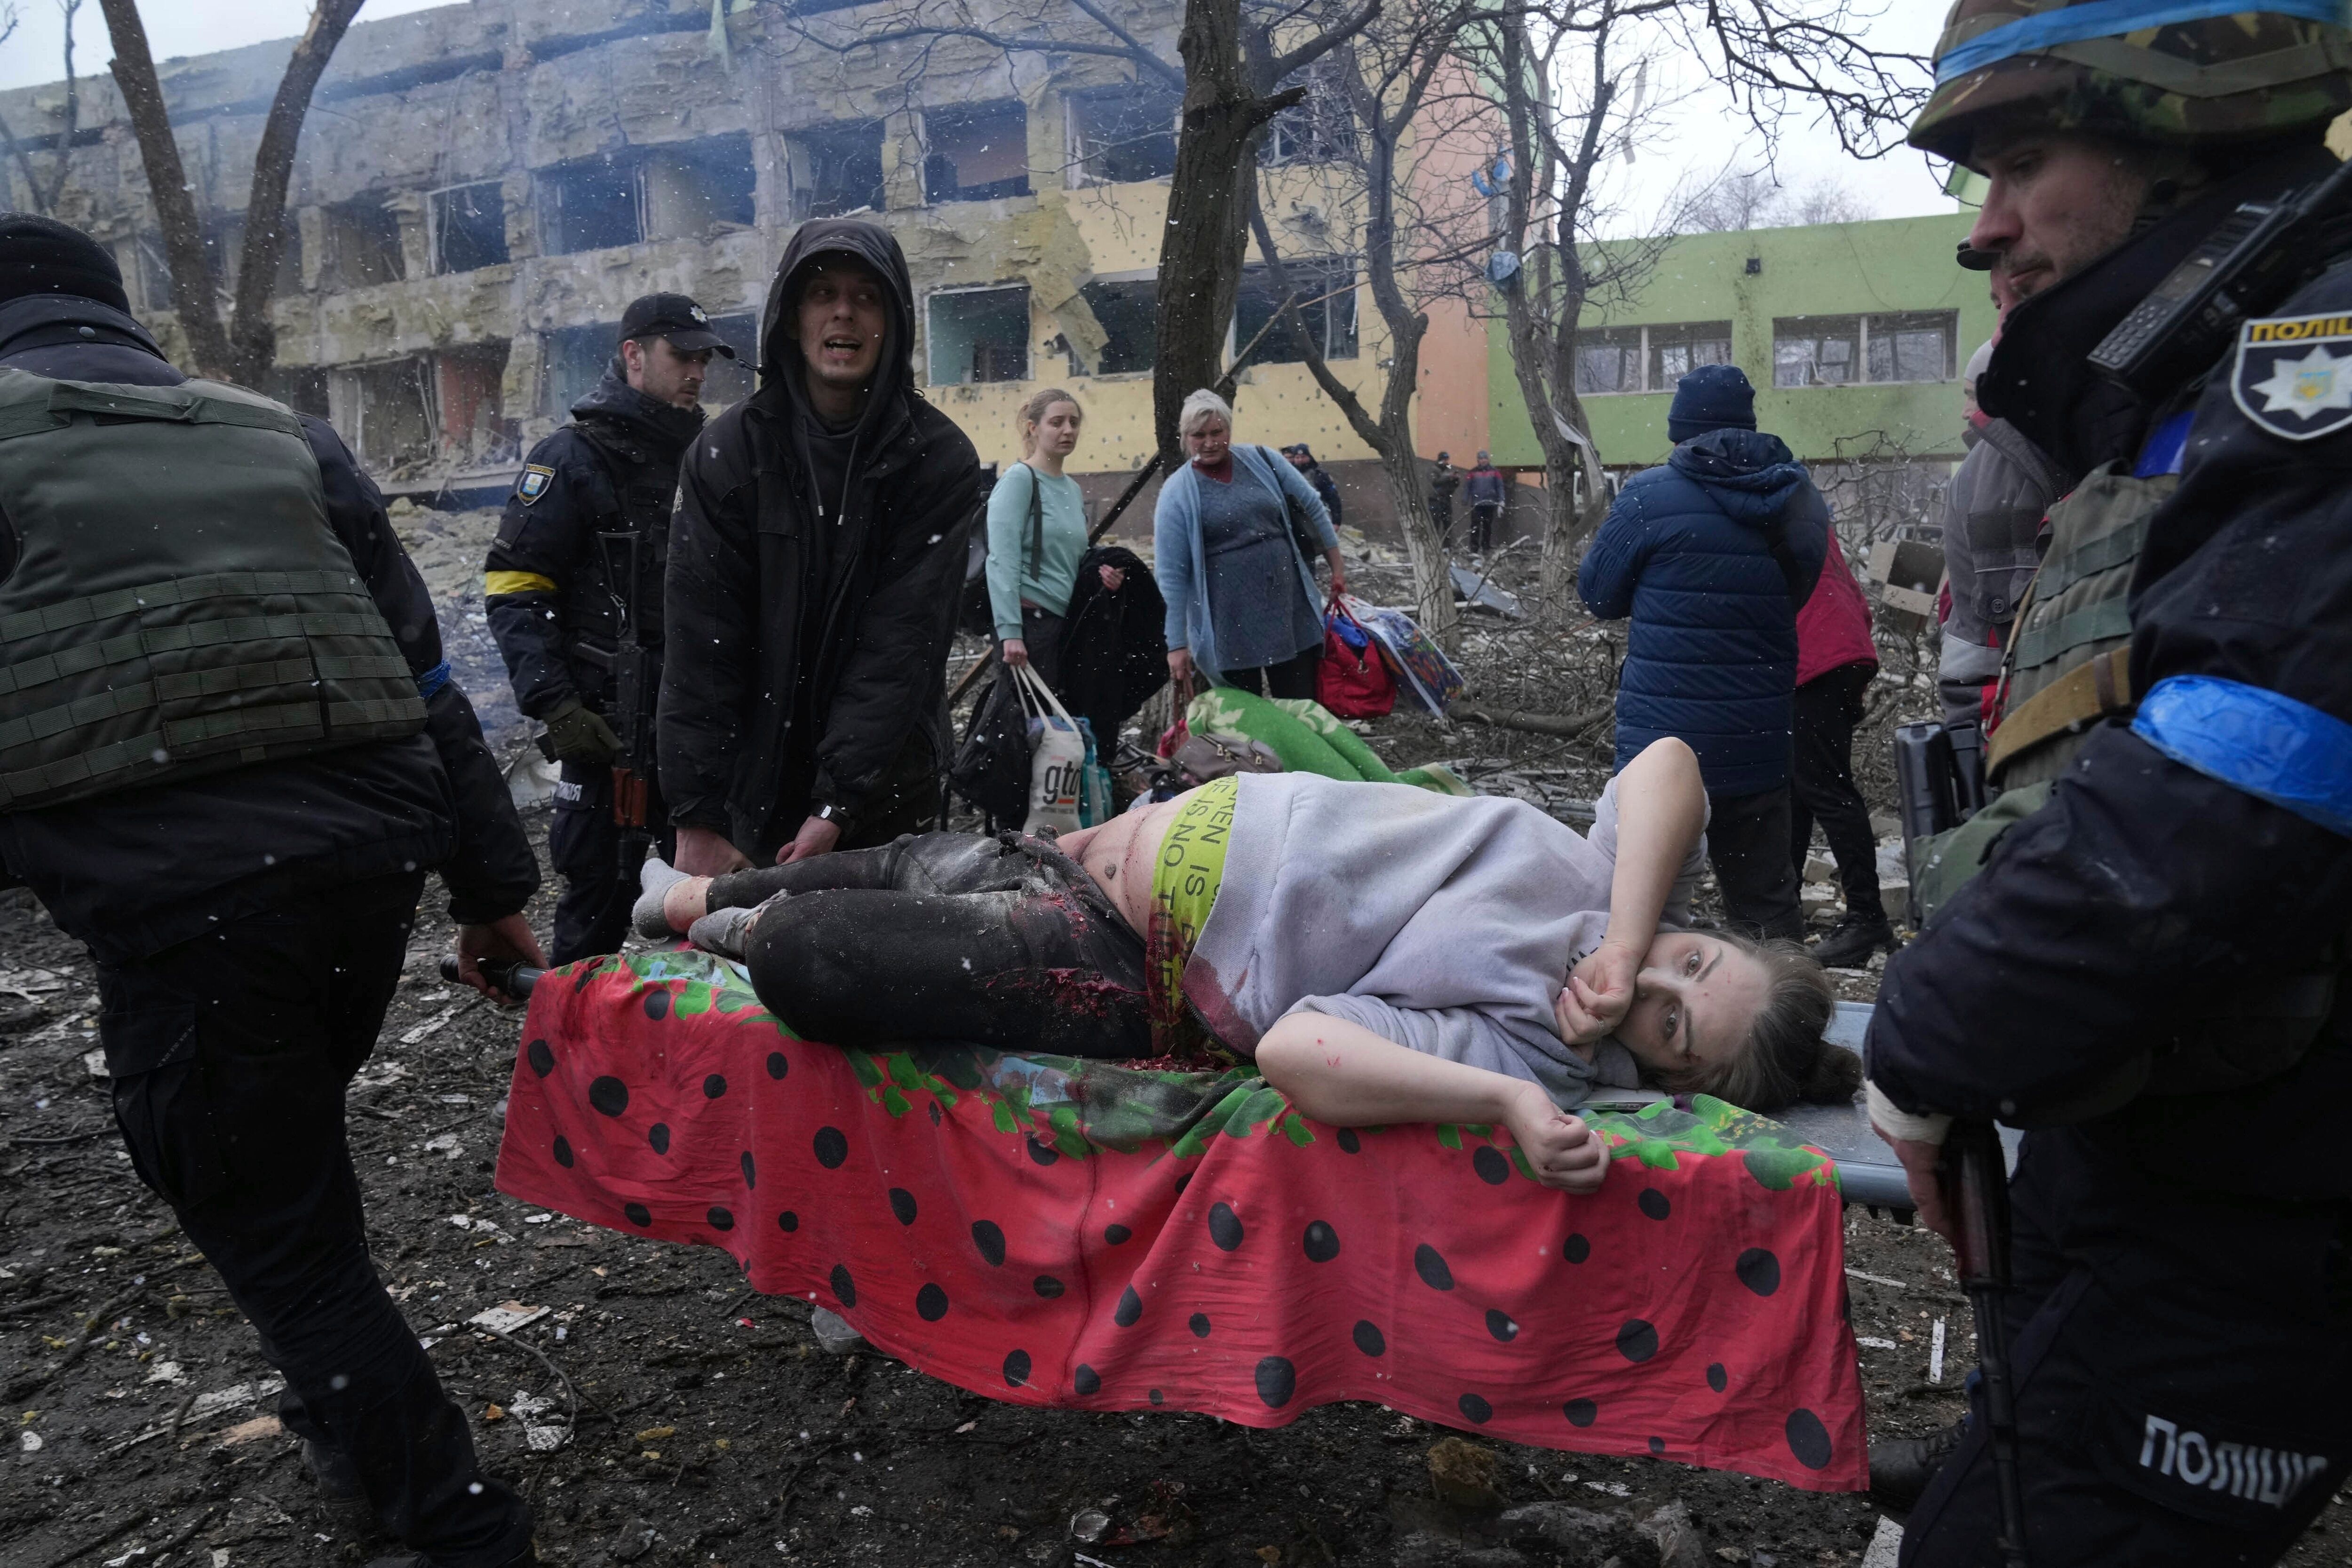 Ukrainian emergency employees and volunteers carry an injured pregnant woman from the damaged by shelling maternity hospital in Mariupol, Ukraine, Wednesday, March 9, 2022. A Russian attack has severely damaged a maternity hospital in the besieged port city of Mariupol, Ukrainian officials say.